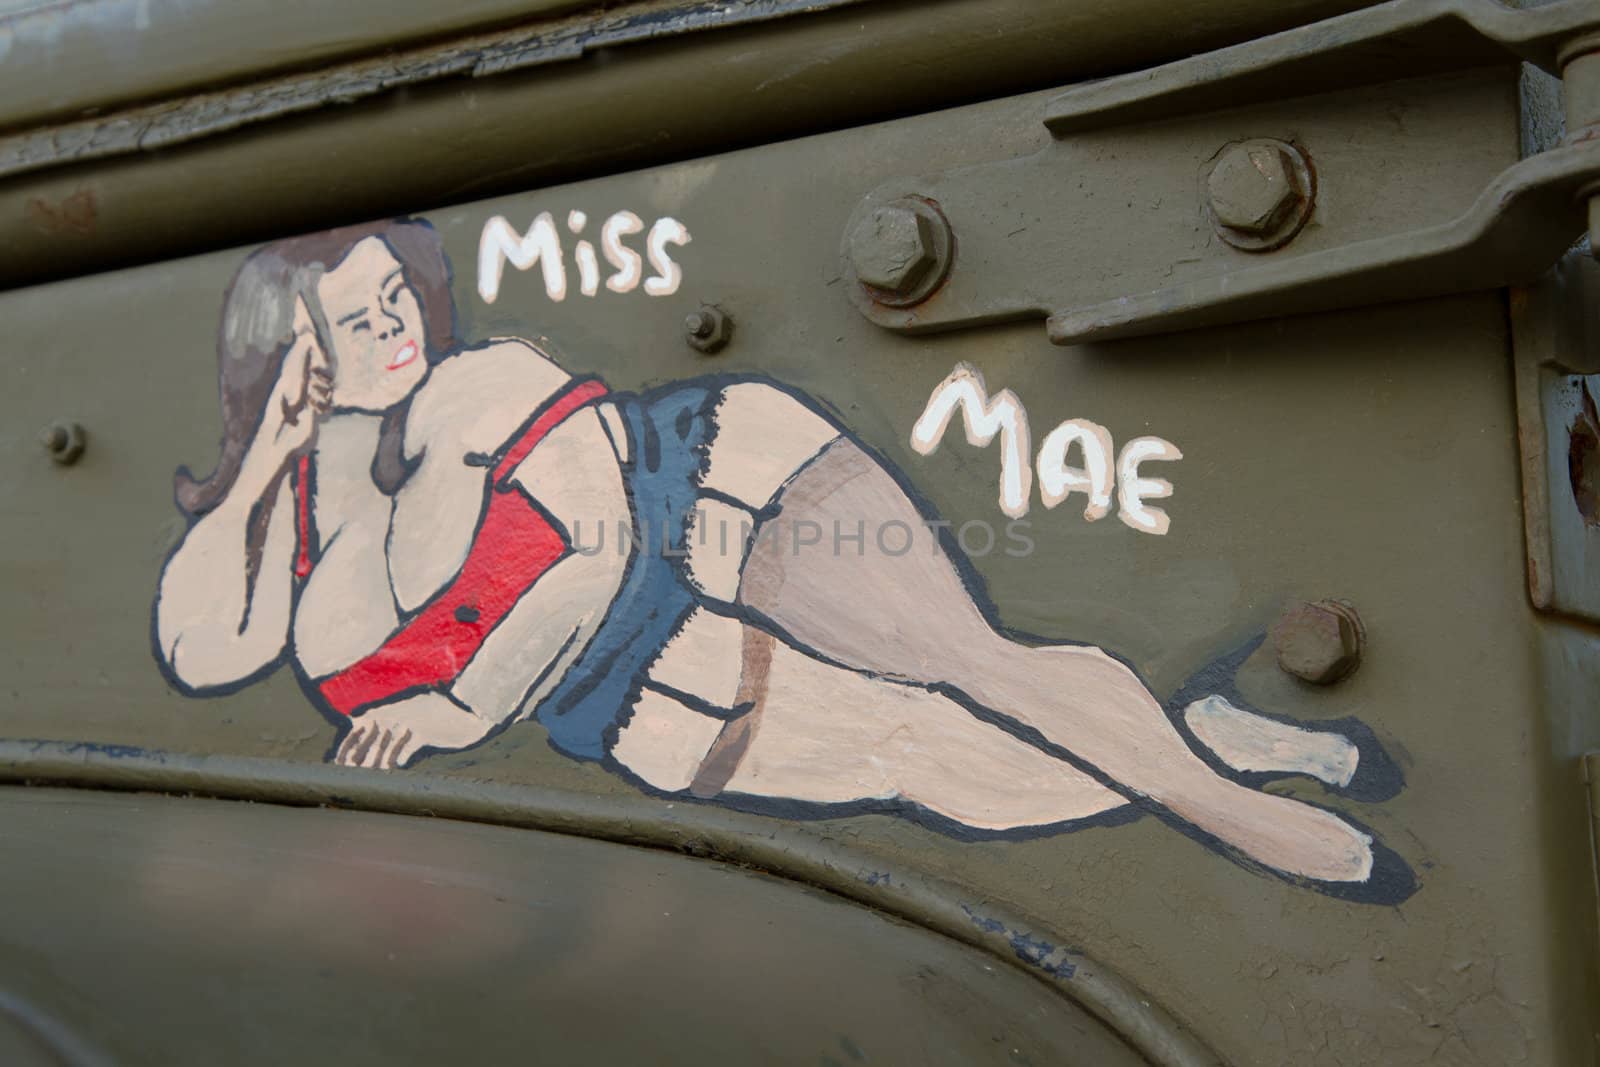 An historic American world war 2 artwork of a buxom woman hand painted onto the olive green surface of a vehicle.